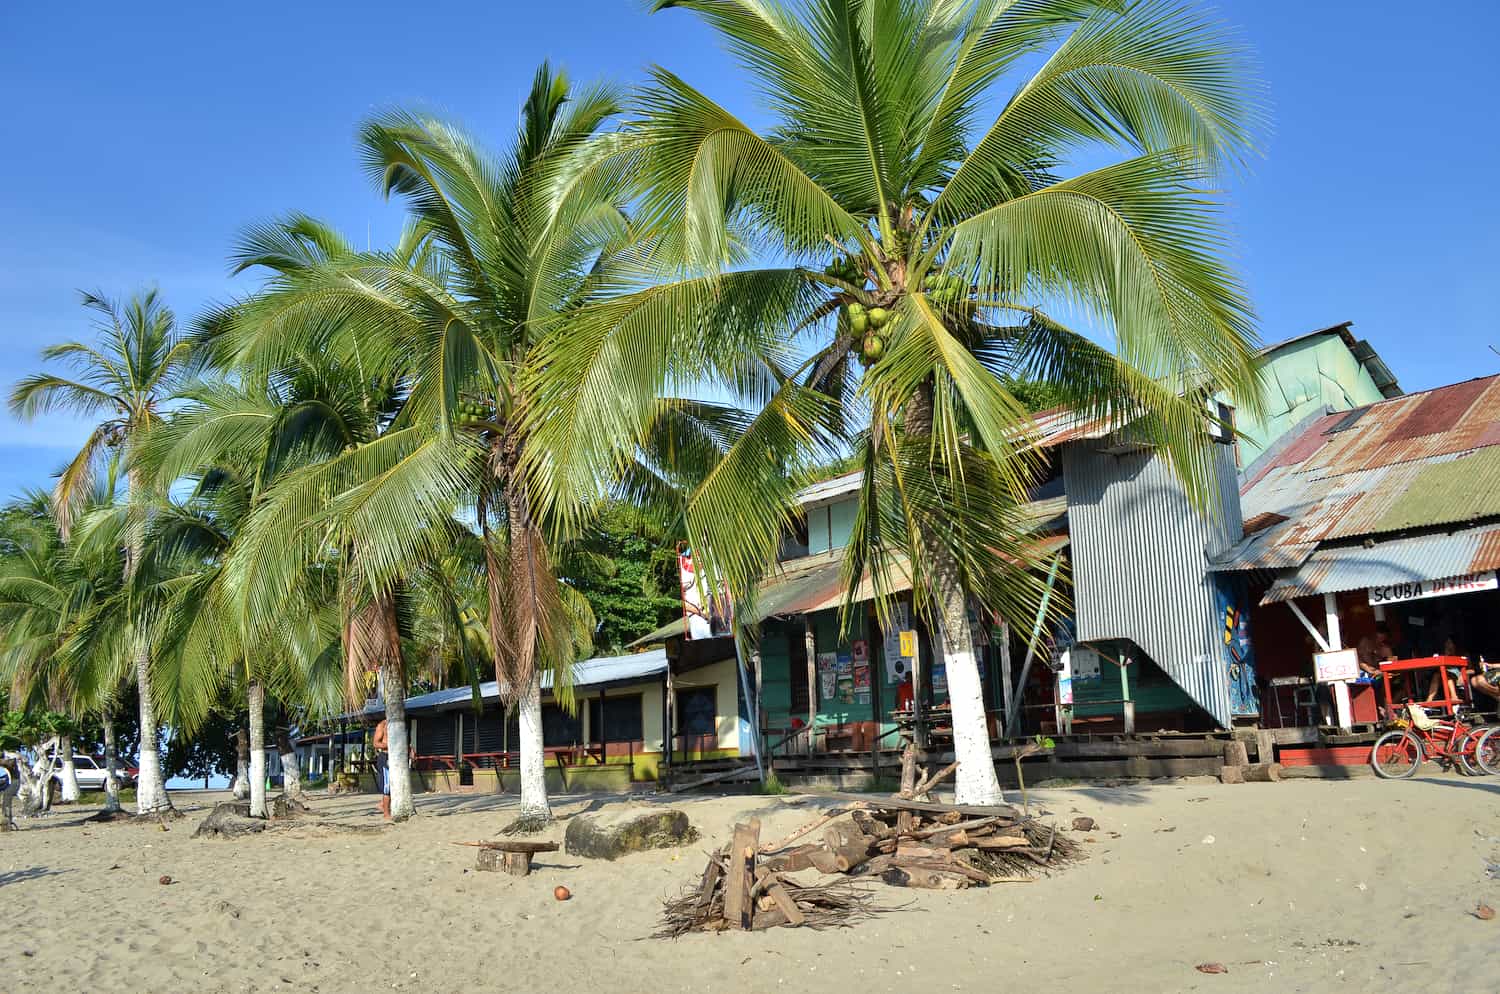 The Caribbean towns of Puerto Viejo and Cahuita developed near the beach for decades before Costa Rica's Costal Zoning Law was established. Now many structures built within 200 meters of the high tide line could be threatened with destruction for violation of the law.